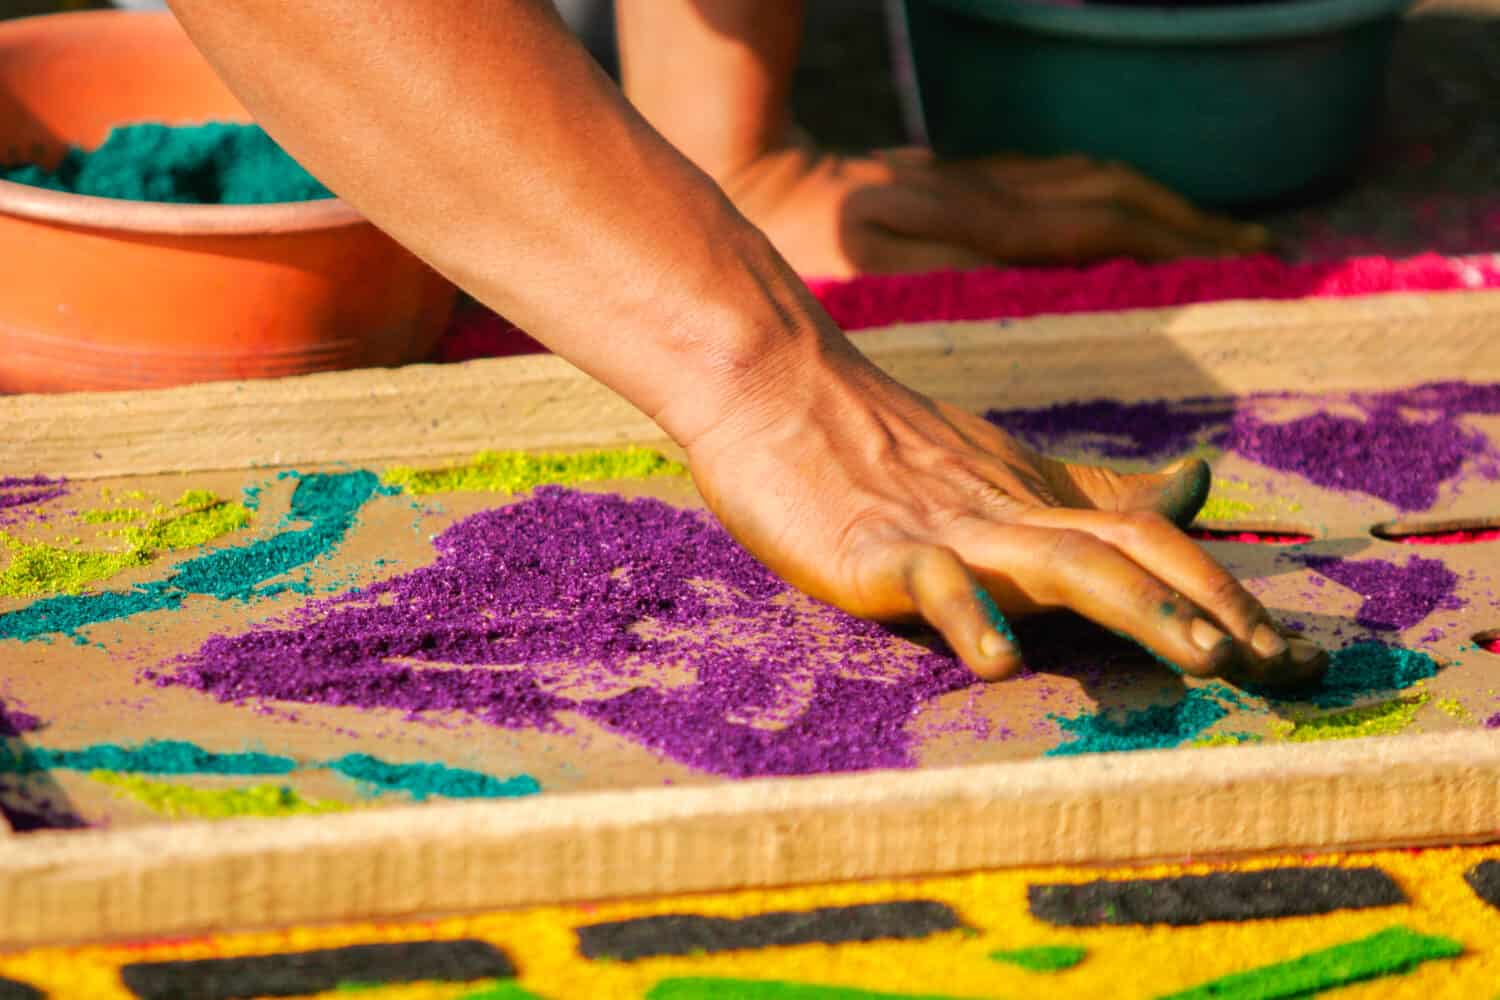 Process of a traditional sawdust carpet in the Holy Week in Antigua Guatemala, Central America.